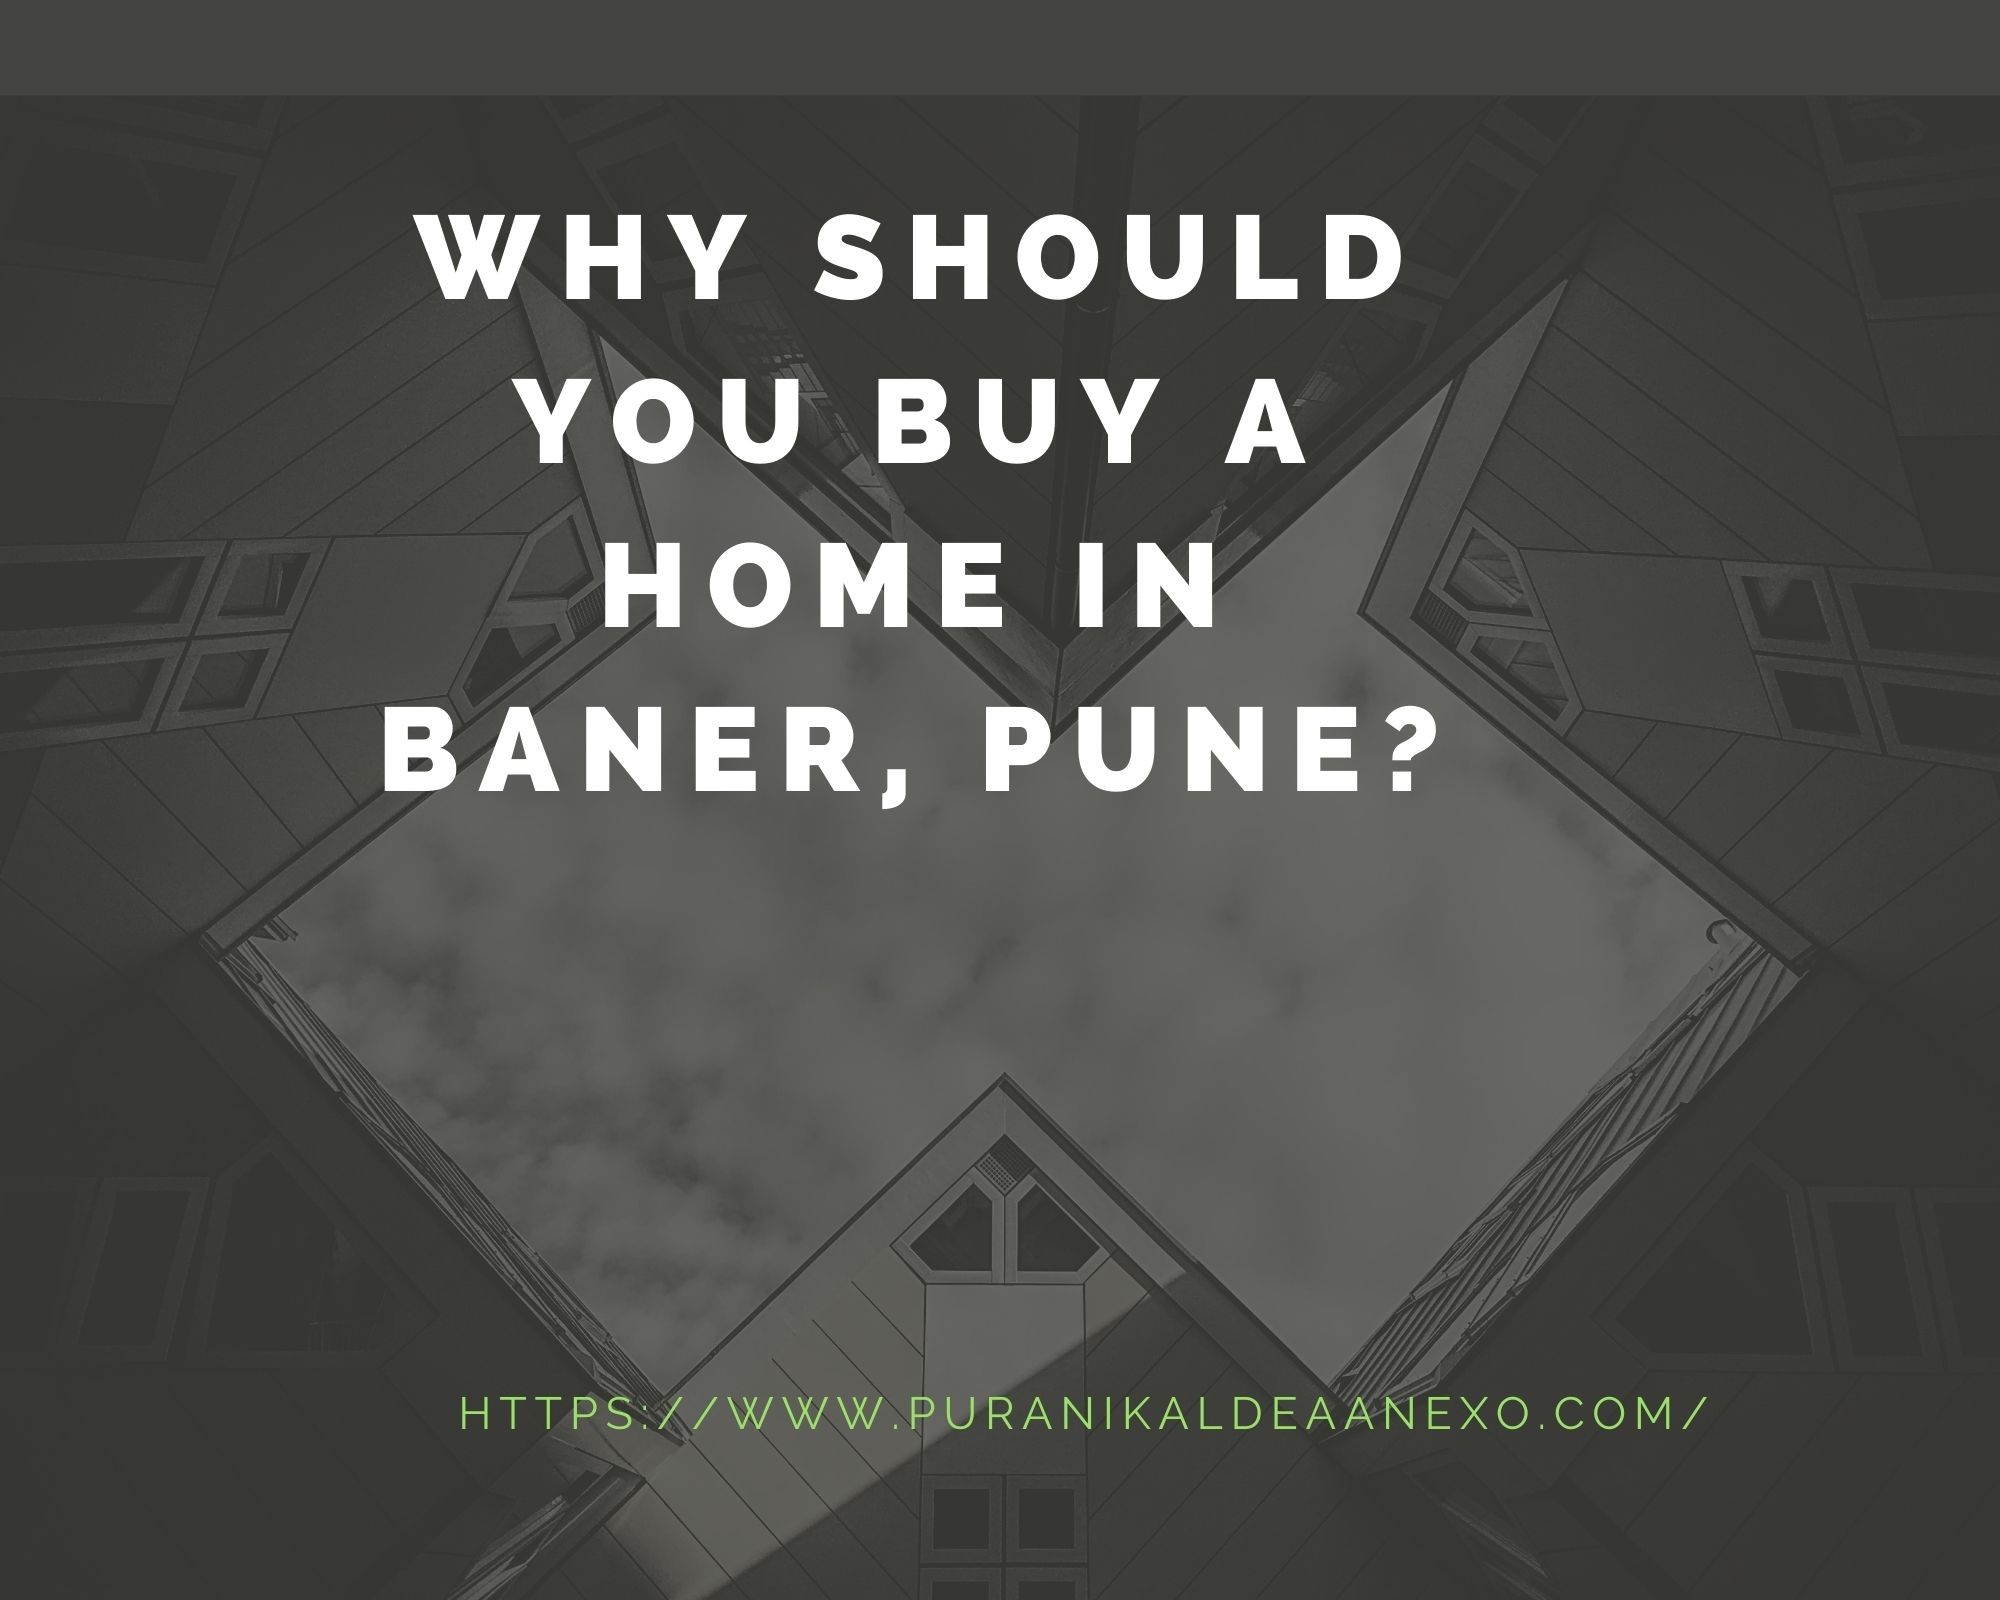 Why should you buy a home in Baner, Pune?